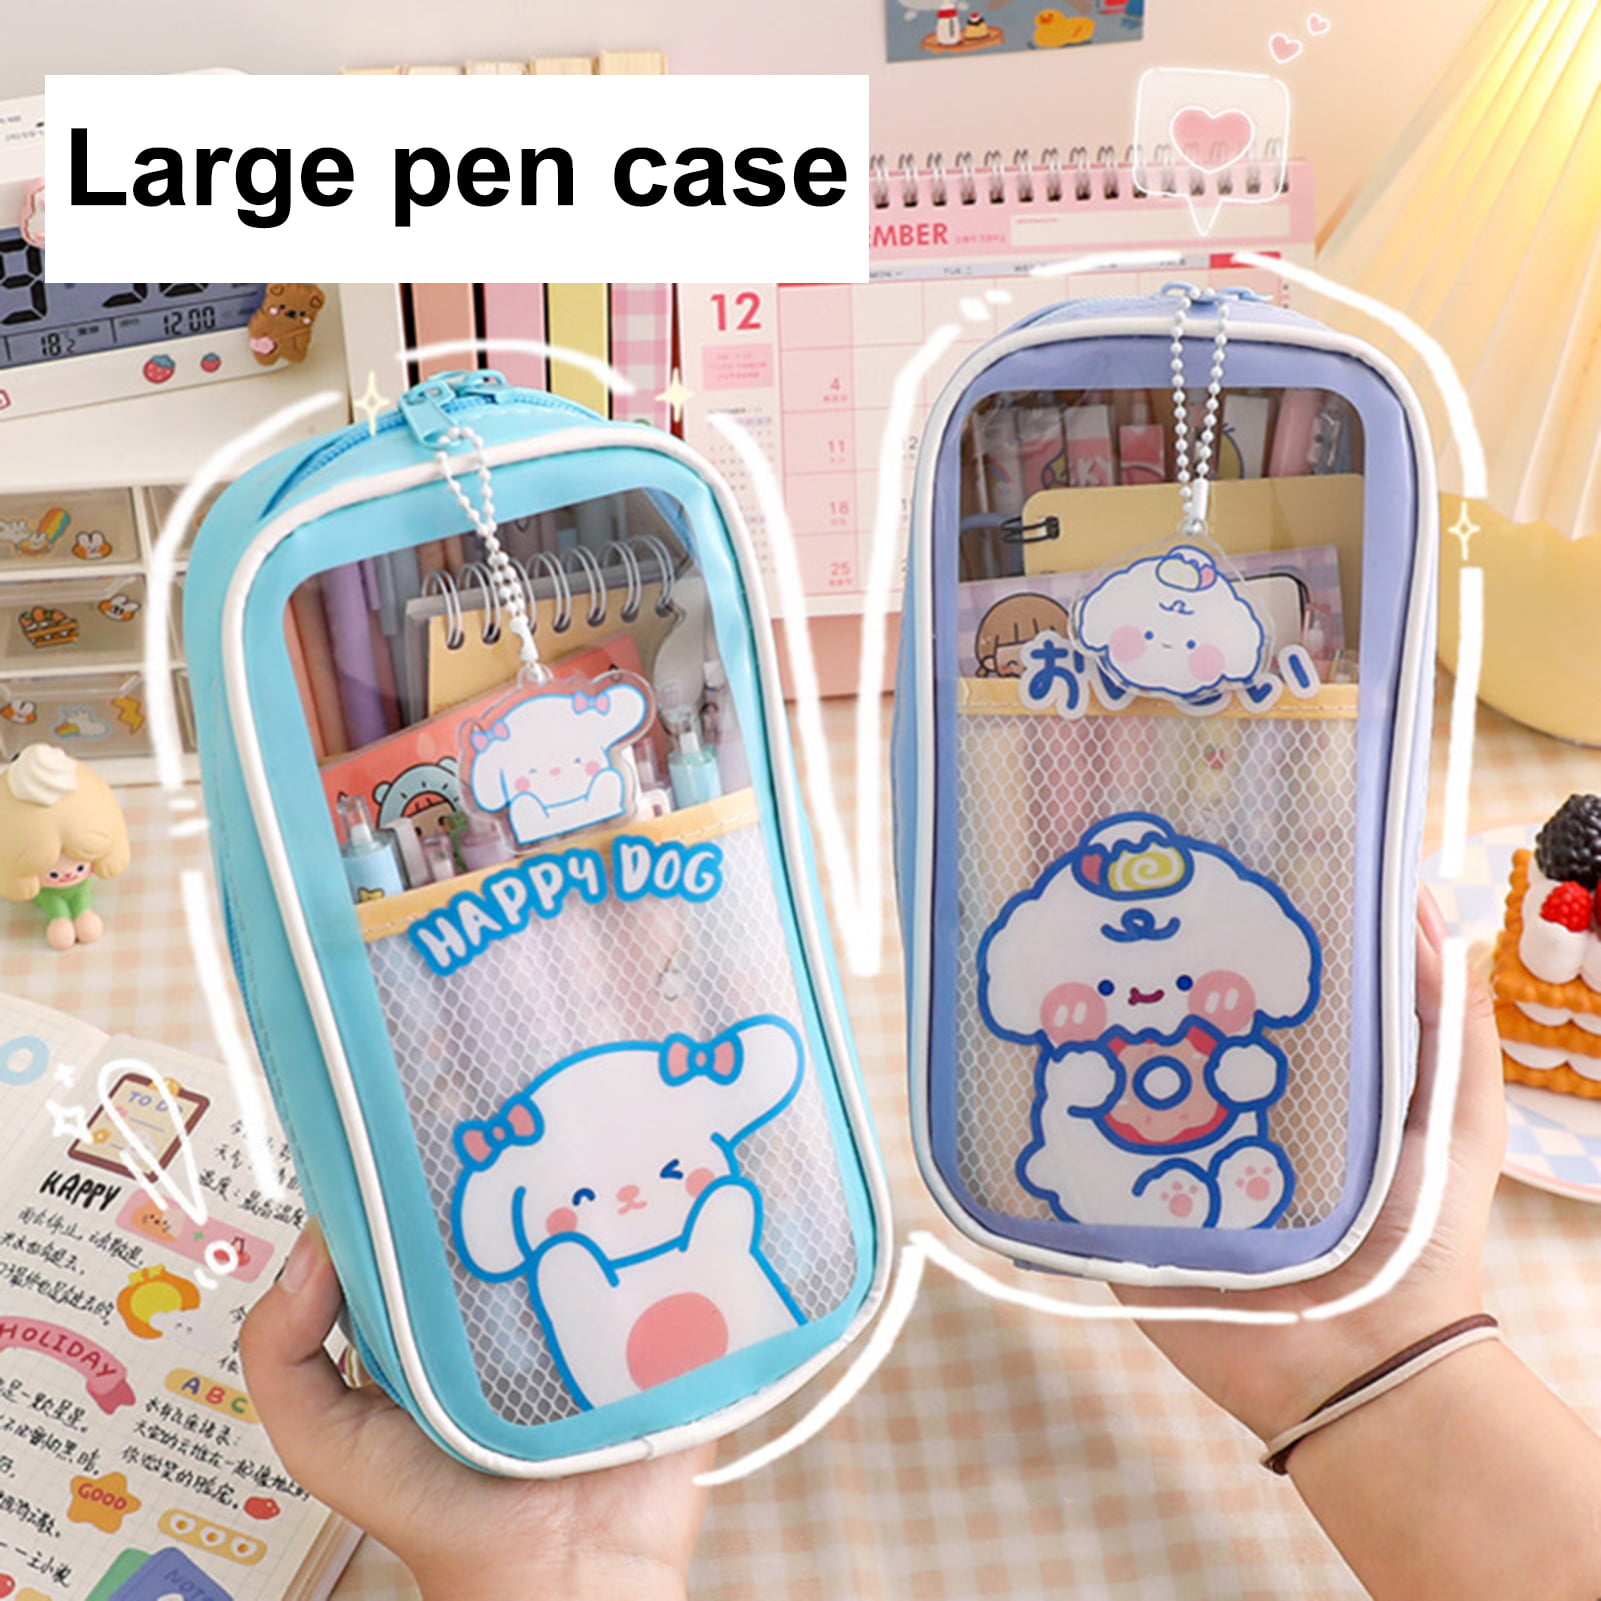 Wholesale Cute Bear Cute Pink Pencil Case Large Capacity Clear Pen Storage  For School Stationery Gift Kawaii Style HKD230831 From Flying_king18, $7.62